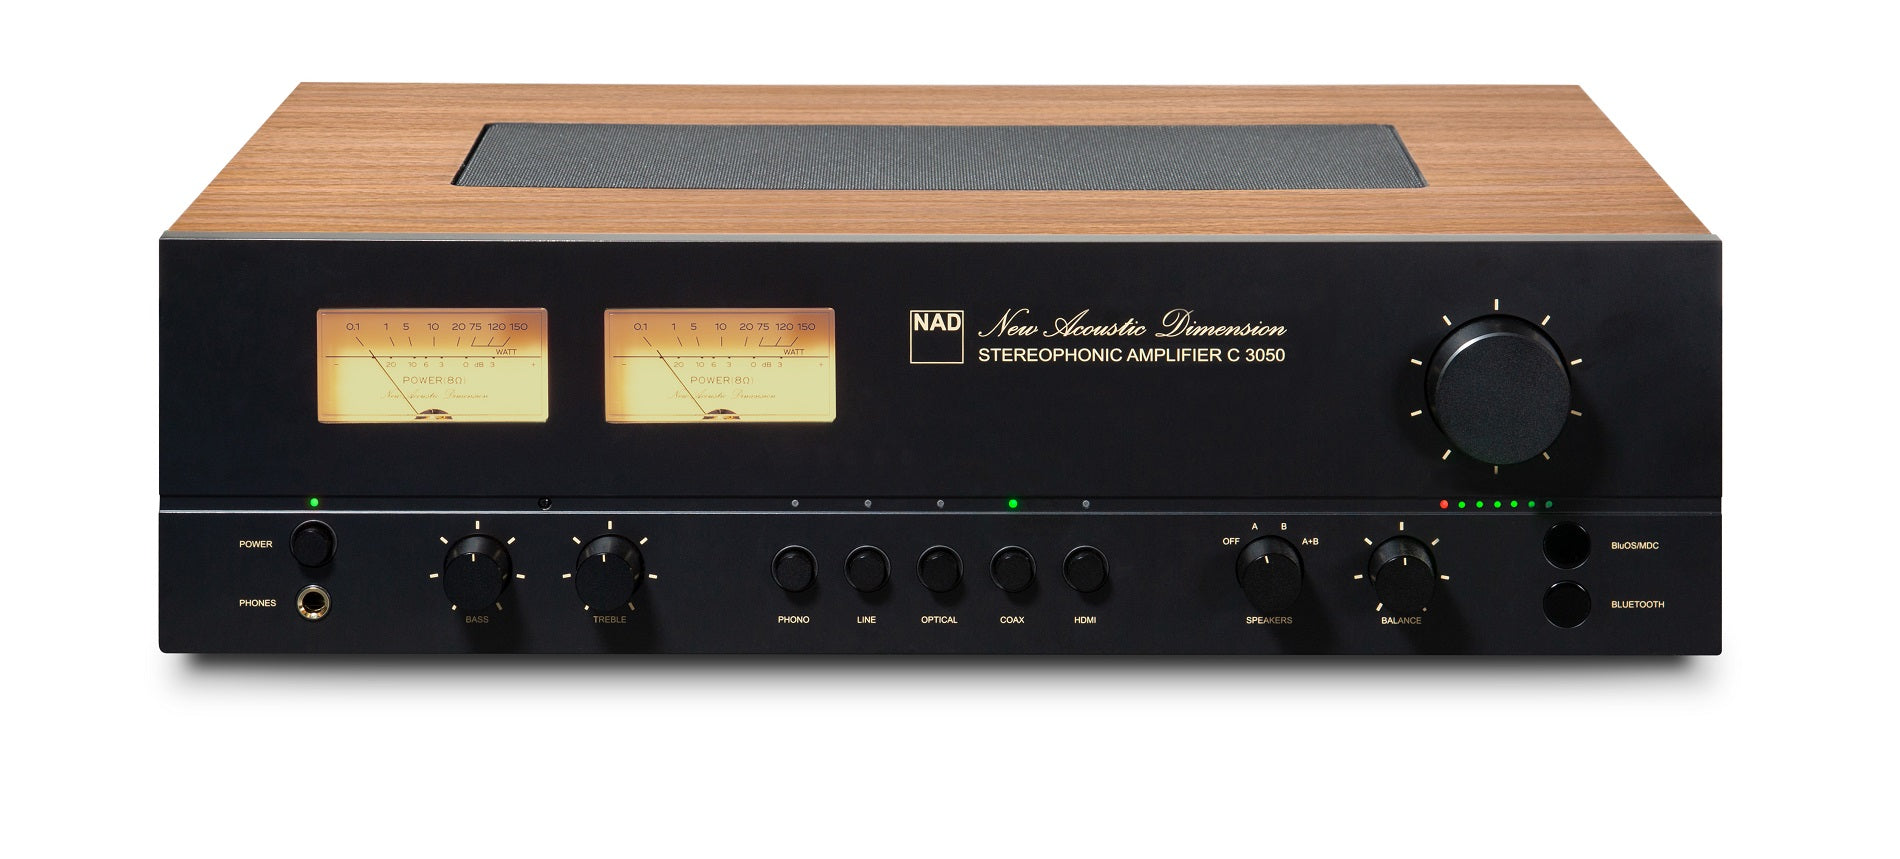 NAD C 3050 STEREOPHONIC AMPLIFIER